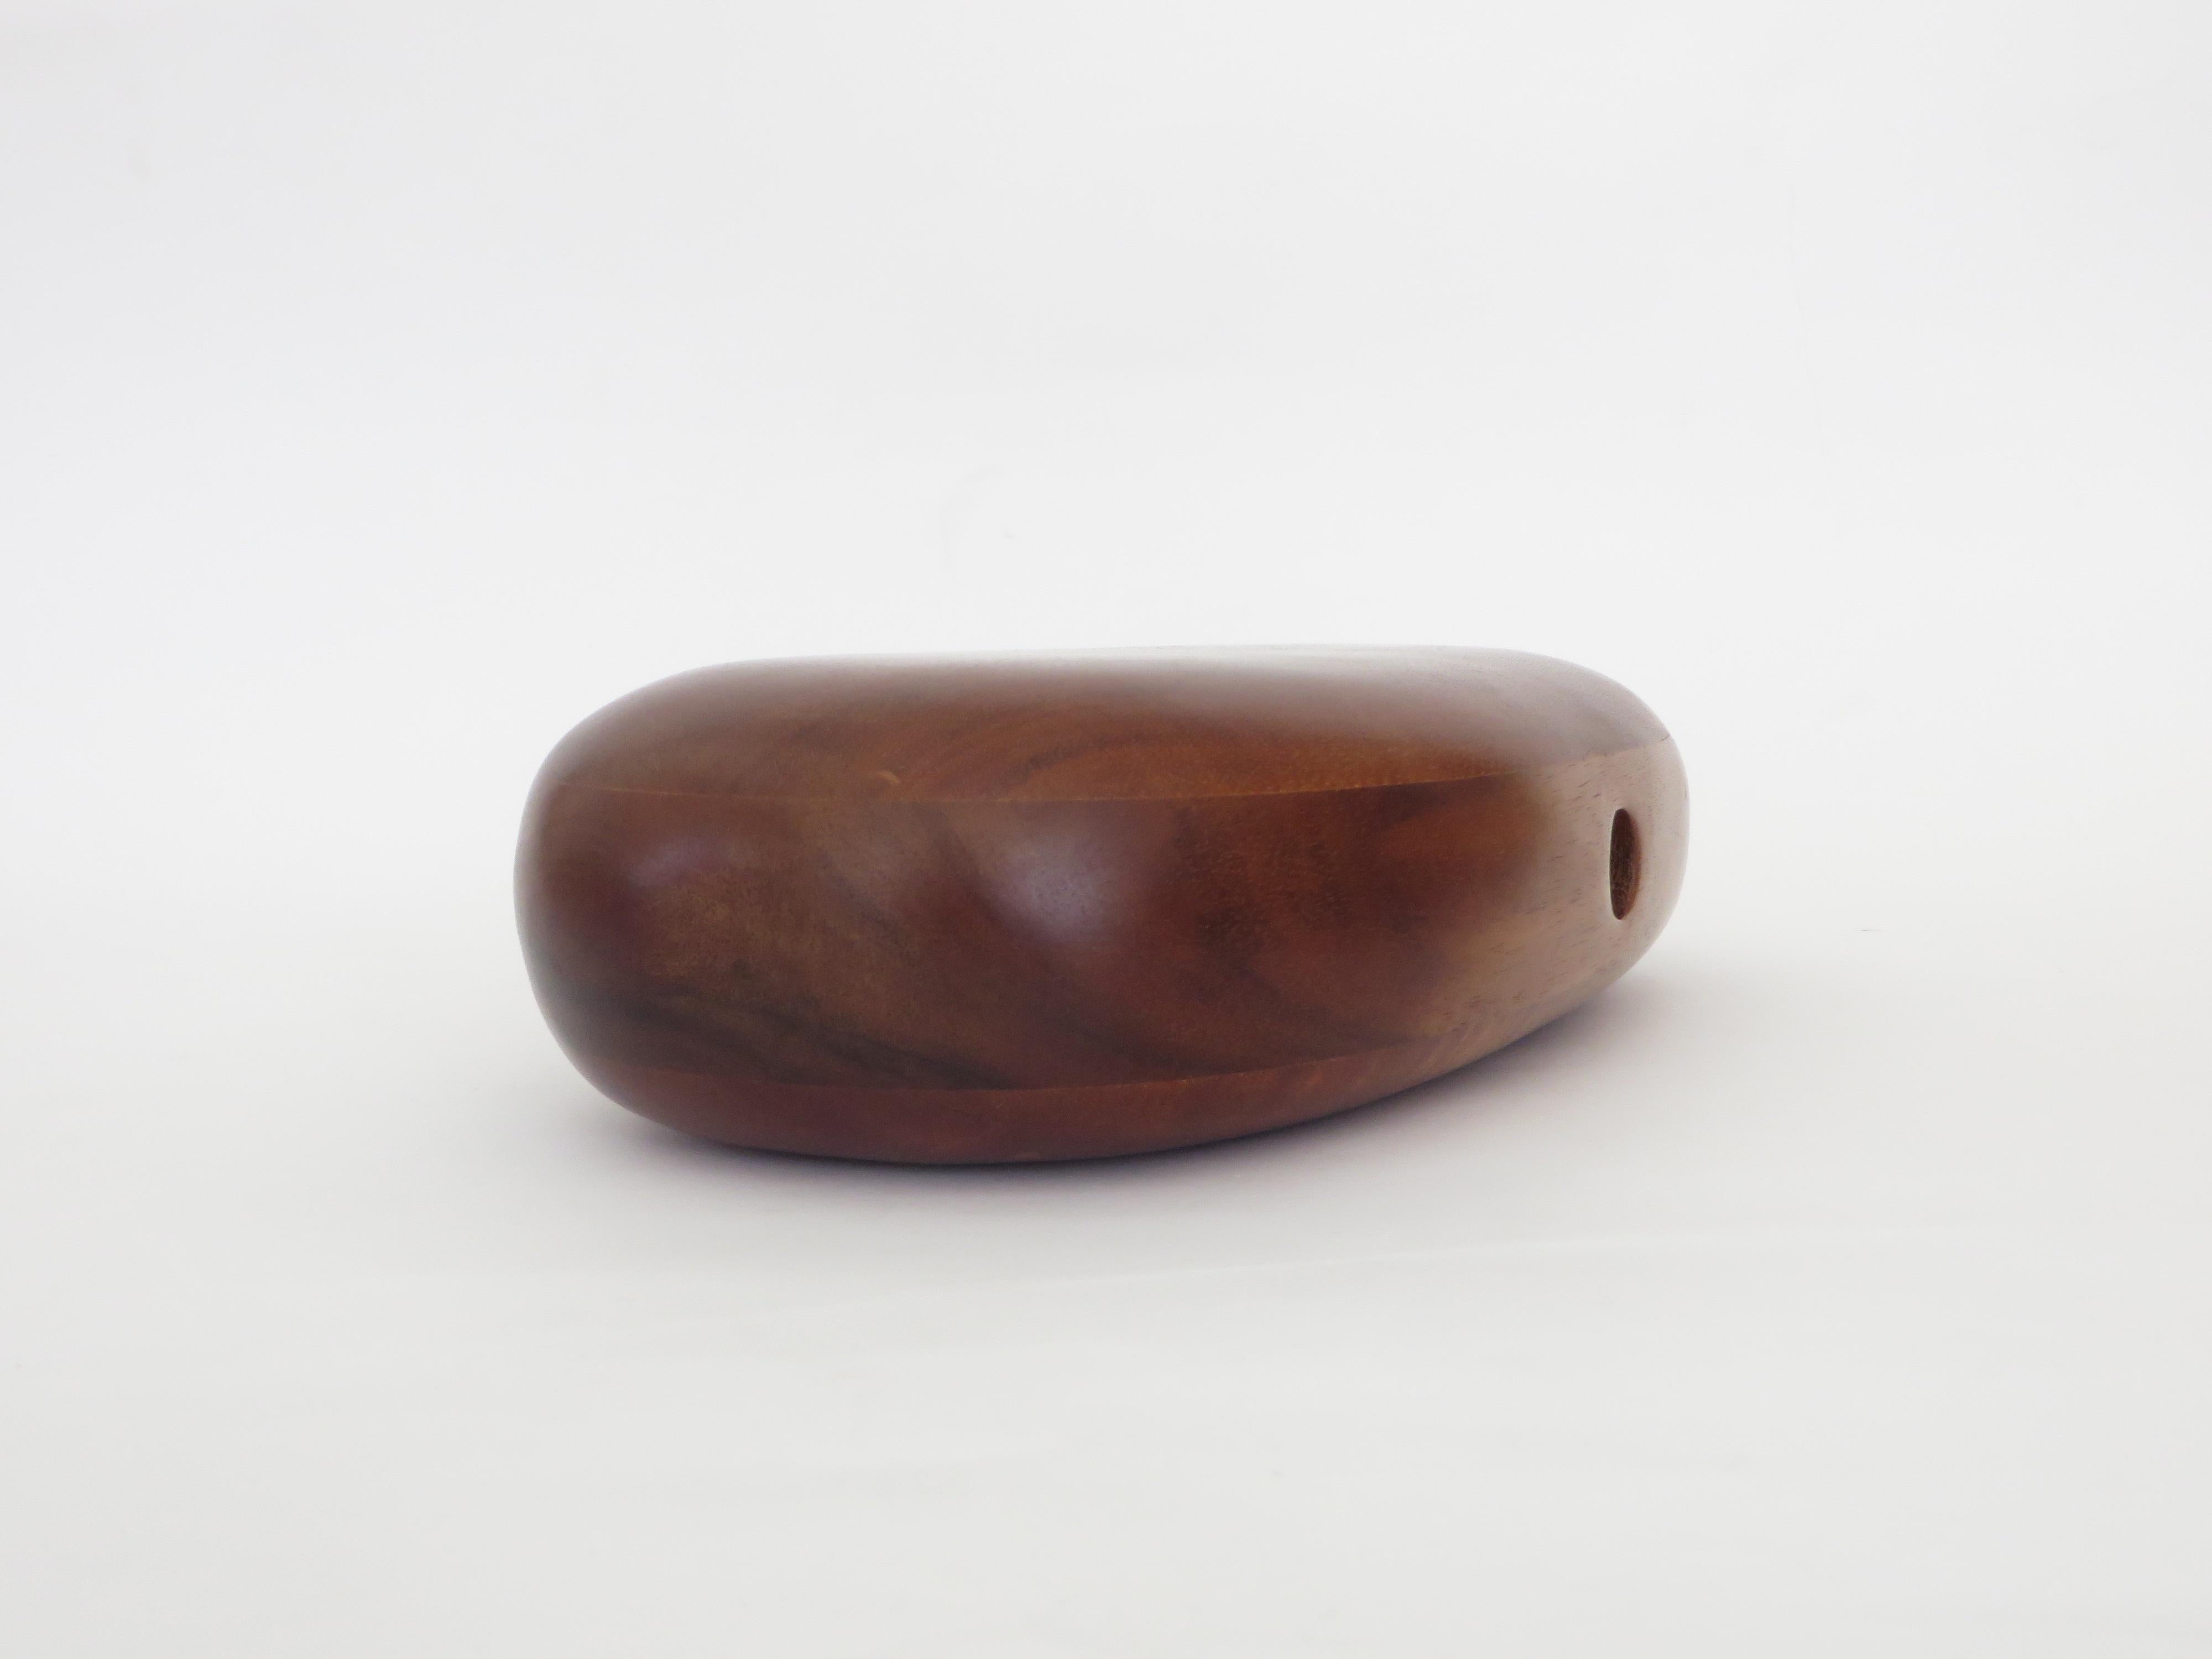 Artist Made Koa Wood Oval Jewelry Box With Velvet Lined Drawer by Dean Santner  3